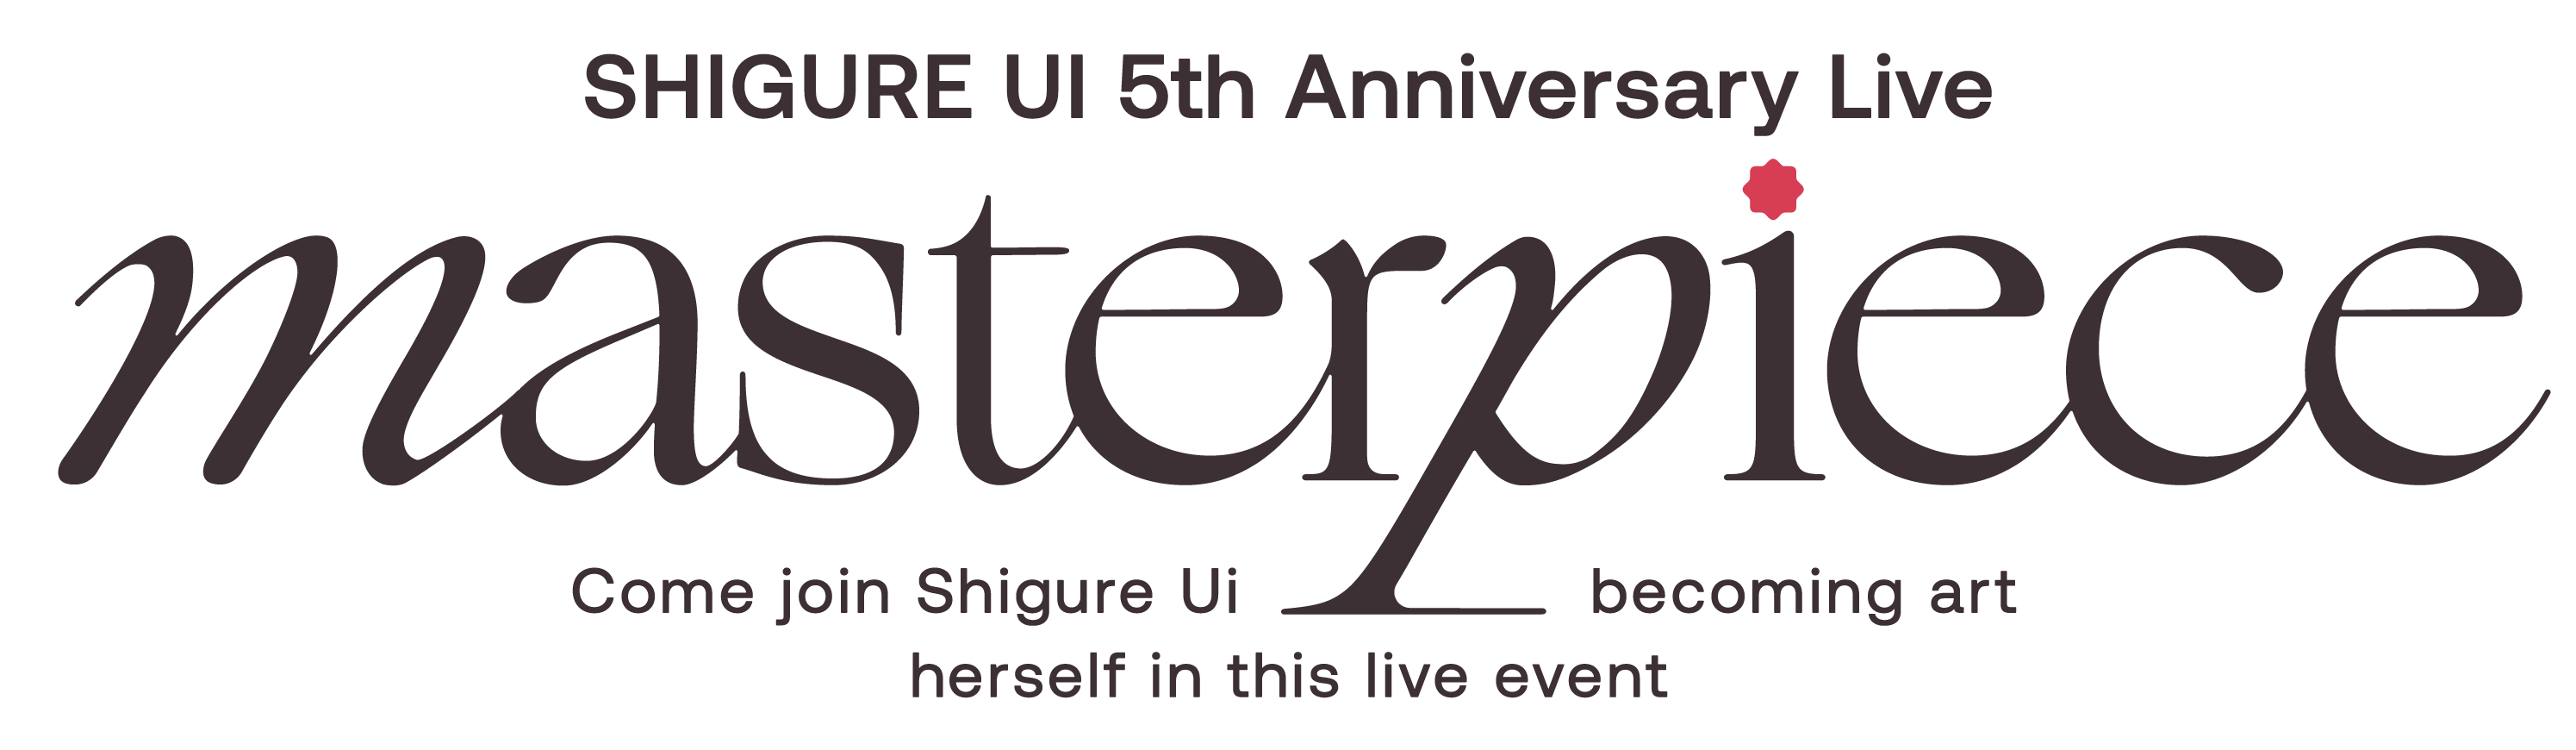 SHIGURE UI 5th Anniversary Live “masterpiece” - Come join Shigure Ui becoming art herself in this live event